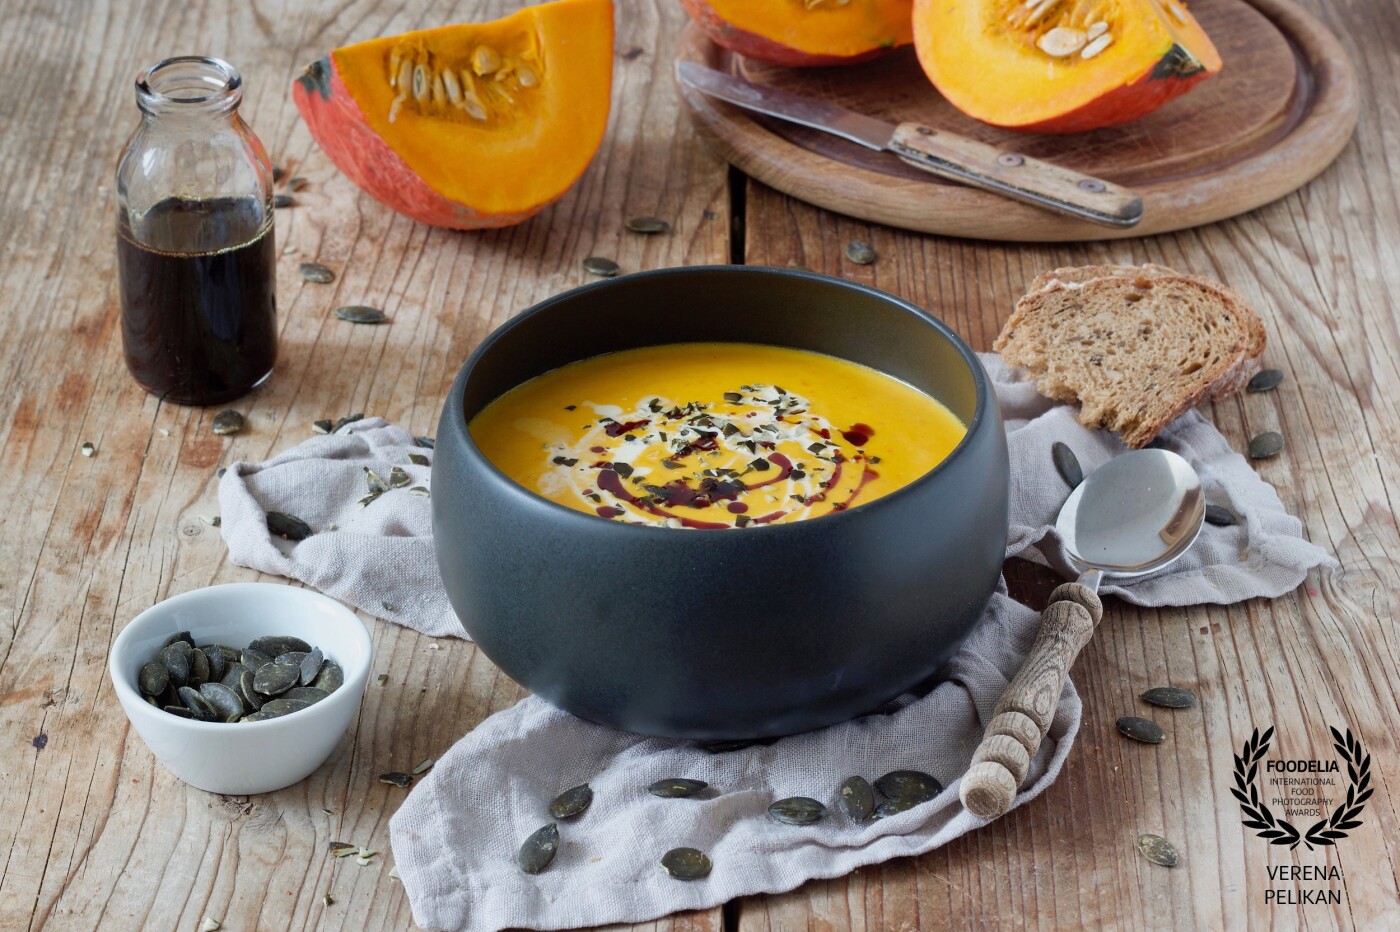 Classic, easy pumpkin soup - quick and easy to make. <br />
You can find the recipe on my website:<br />
sweetsandlifestyle.com/rezept/kuerbiscremesuppe